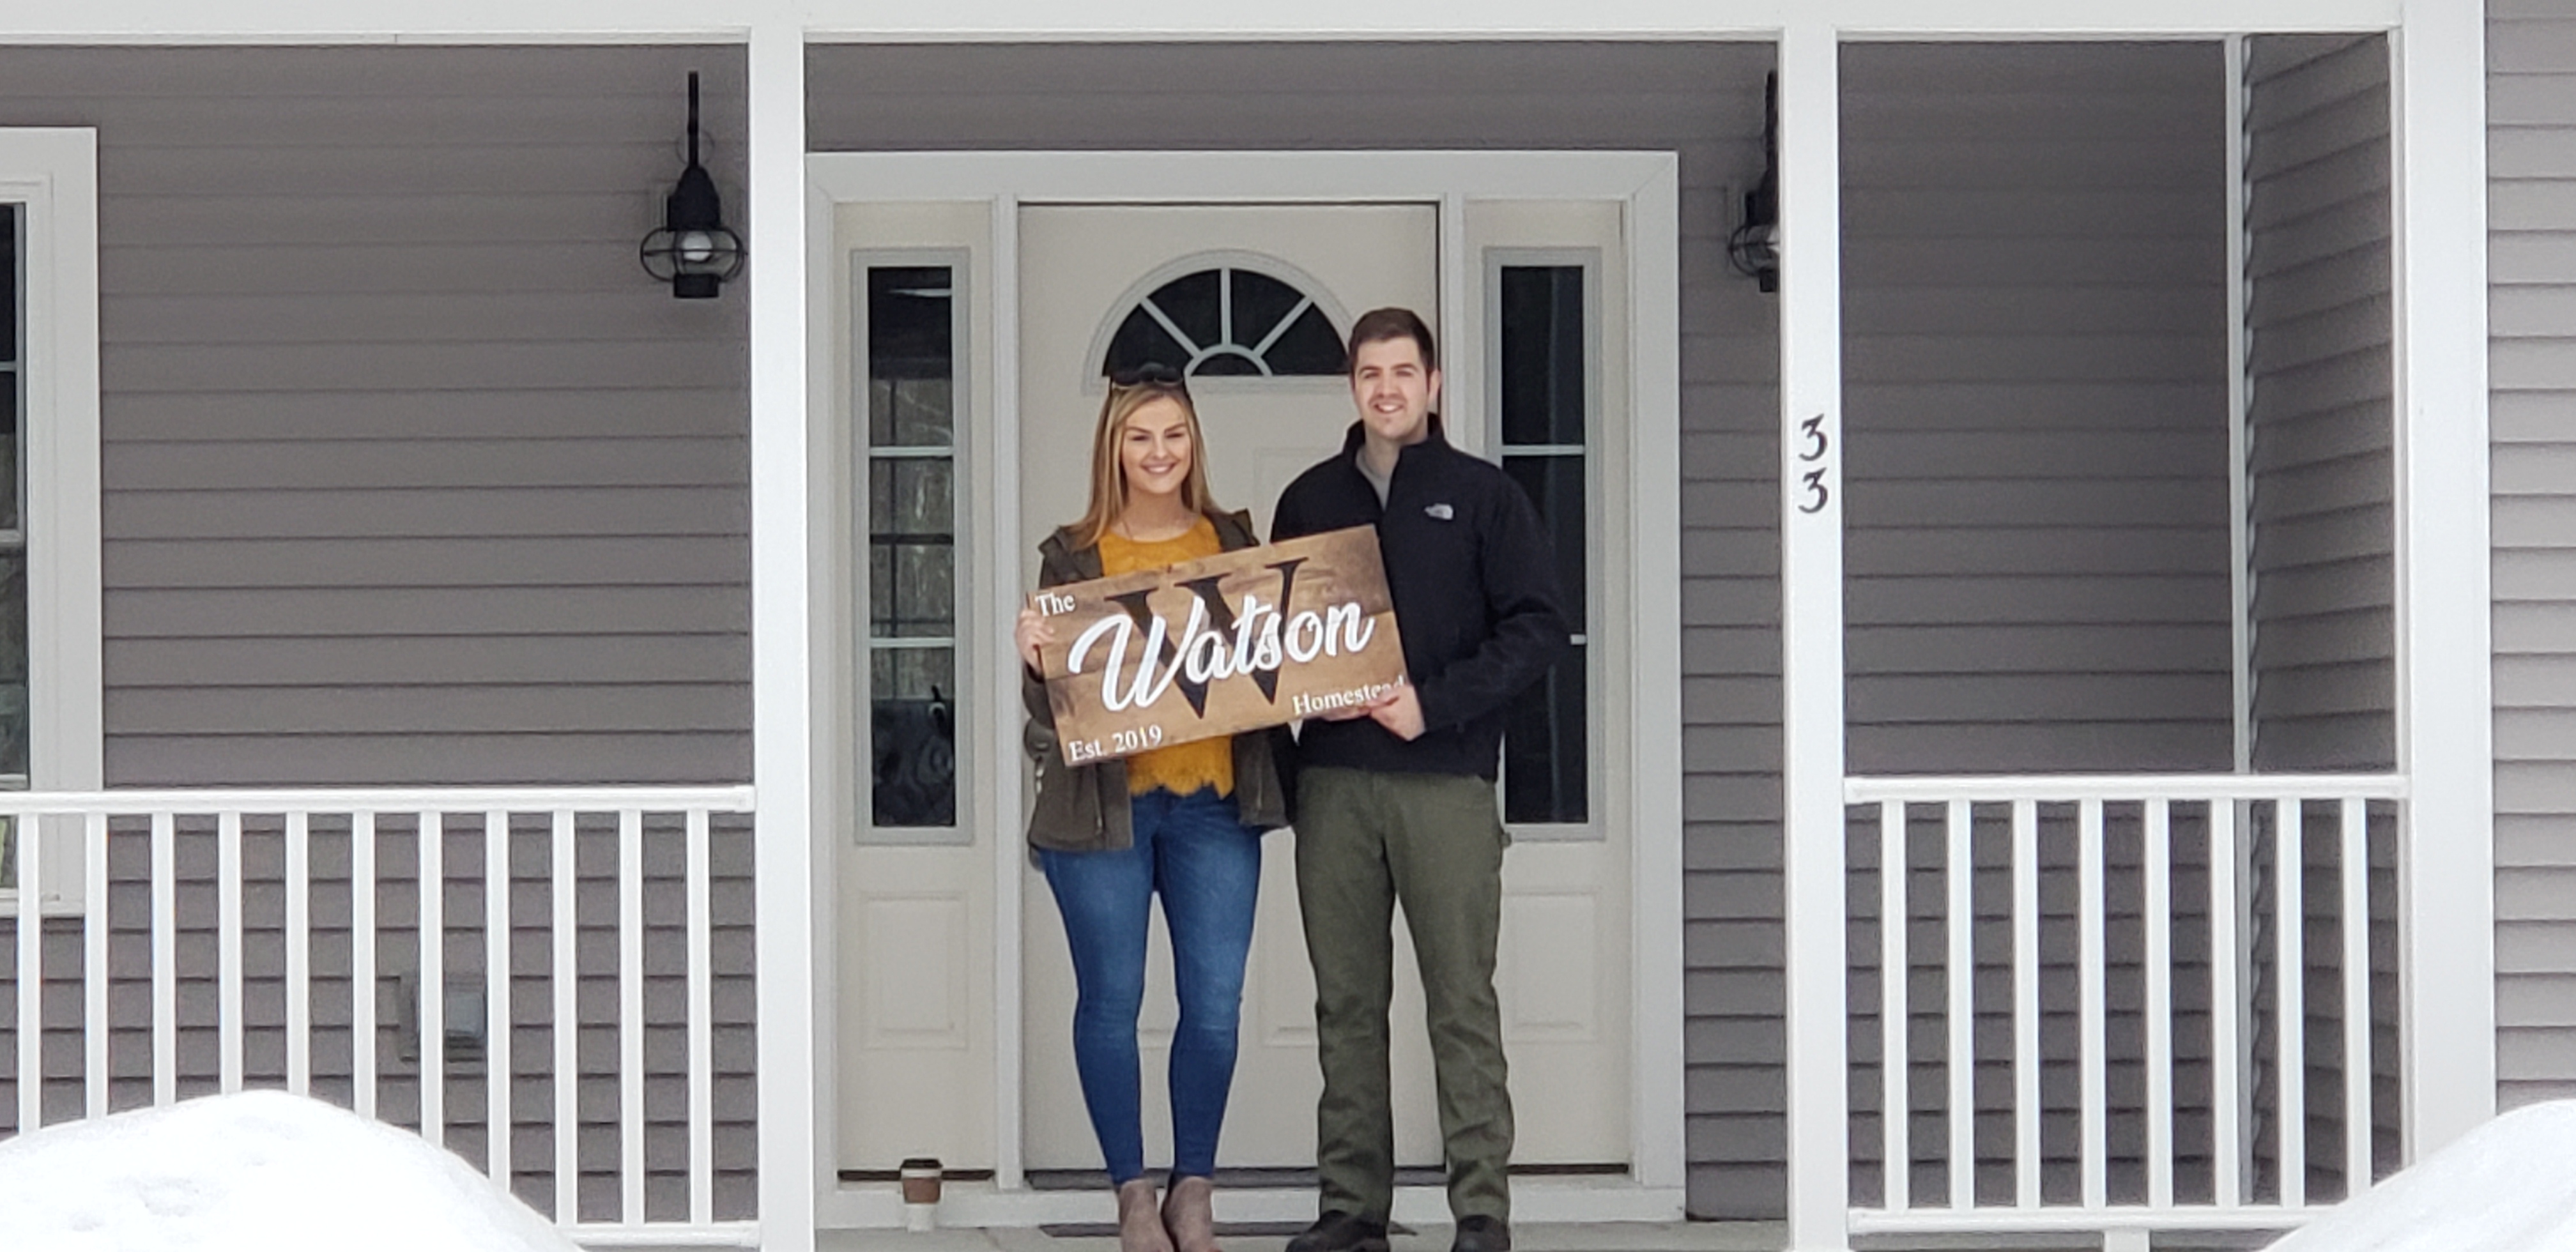 We Were Very Intimated with the Process of Buying our First Home